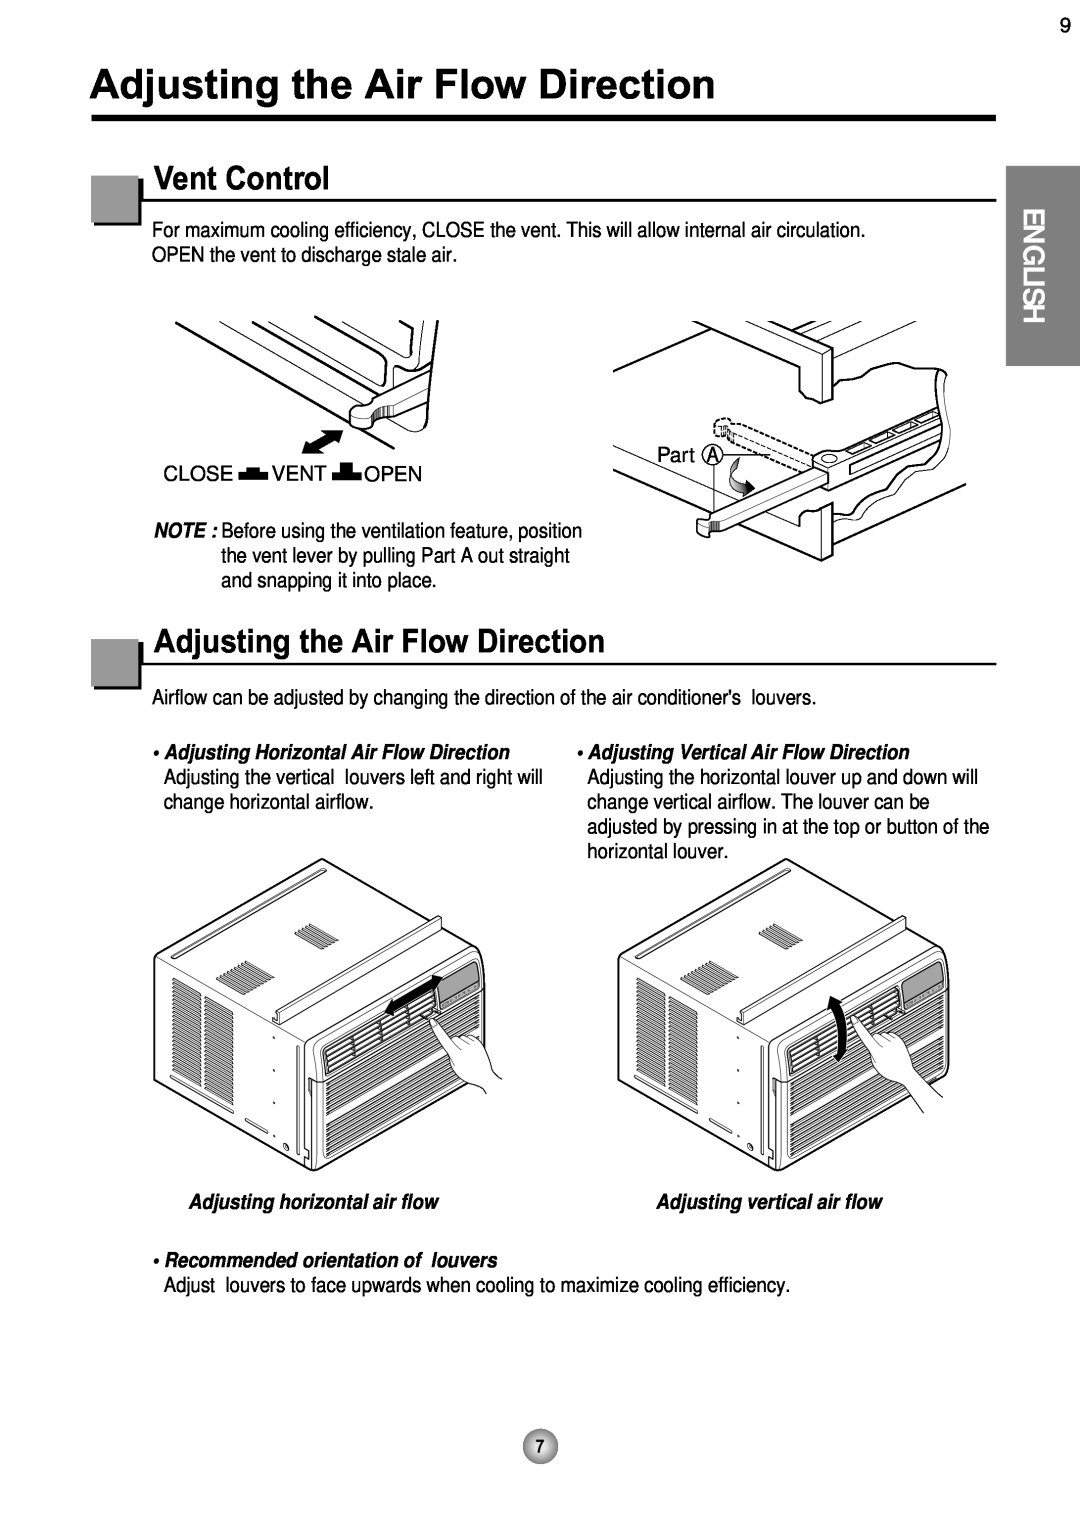 Friedrich ZQ08, ZQ10 operation manual Adjusting the Air Flow Direction, English, • Adjusting Horizontal Air Flow Direction 